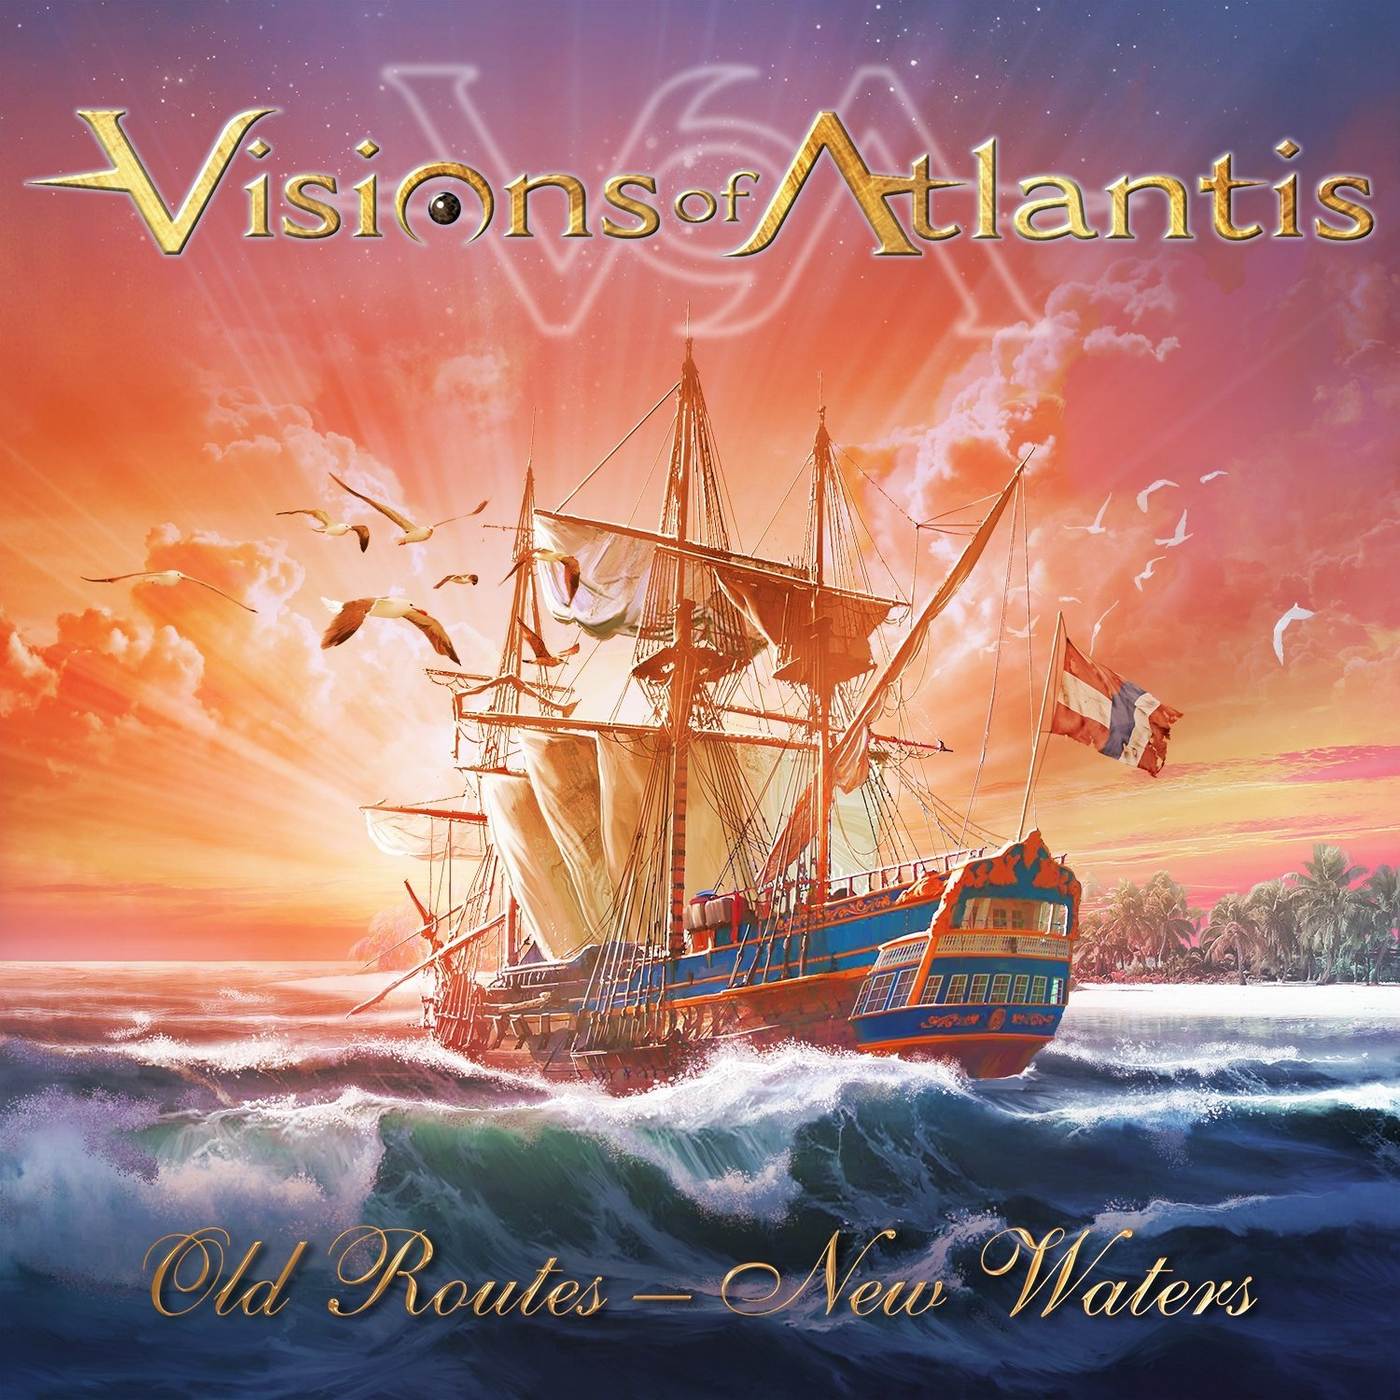 Old Routes – New Waters – Visions of Atlantis